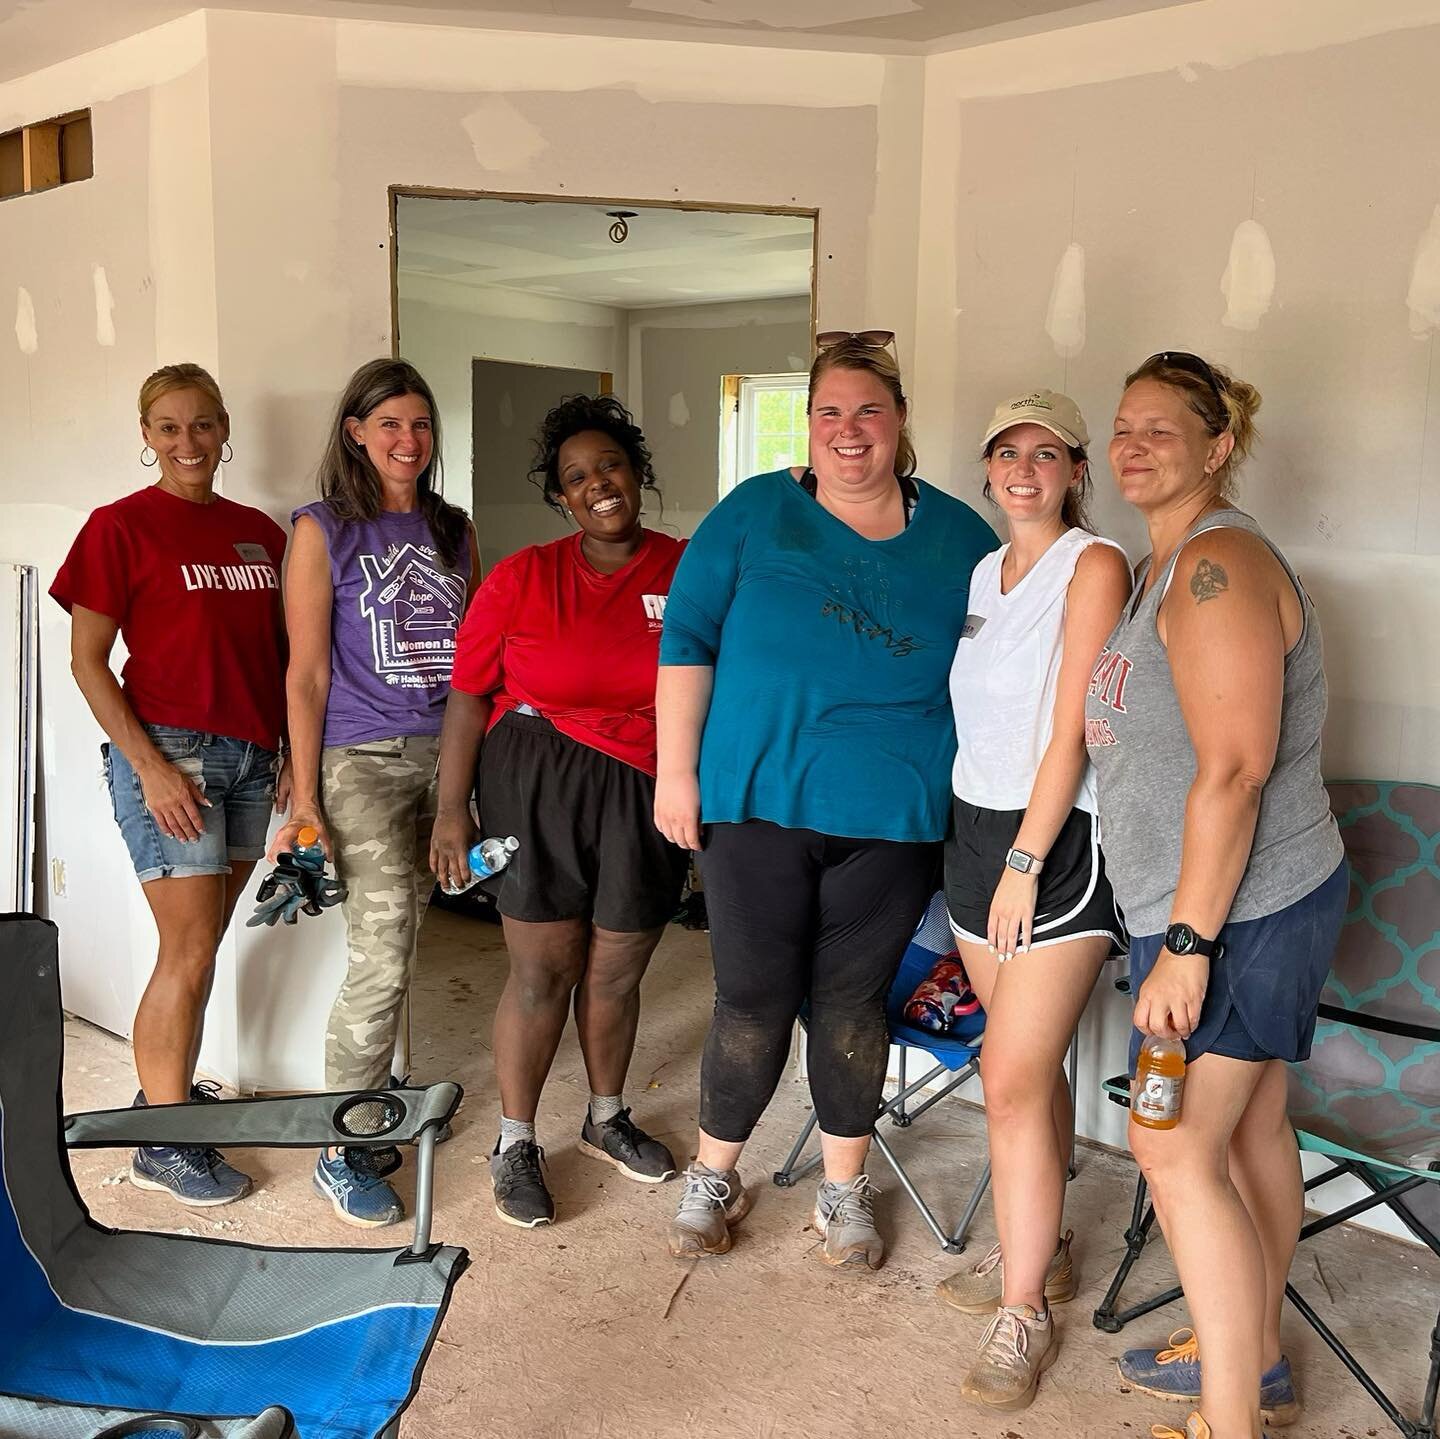 Our team had a blast working on Habitat for Humanity of the Mid-Ohio Valley's Women Build last week! 🏠🔨

We are so proud to be one of the sponsors on this project, and we can't wait for our next build day! 😃

#LiveUnited #UnitedInTheGame #WomenBui